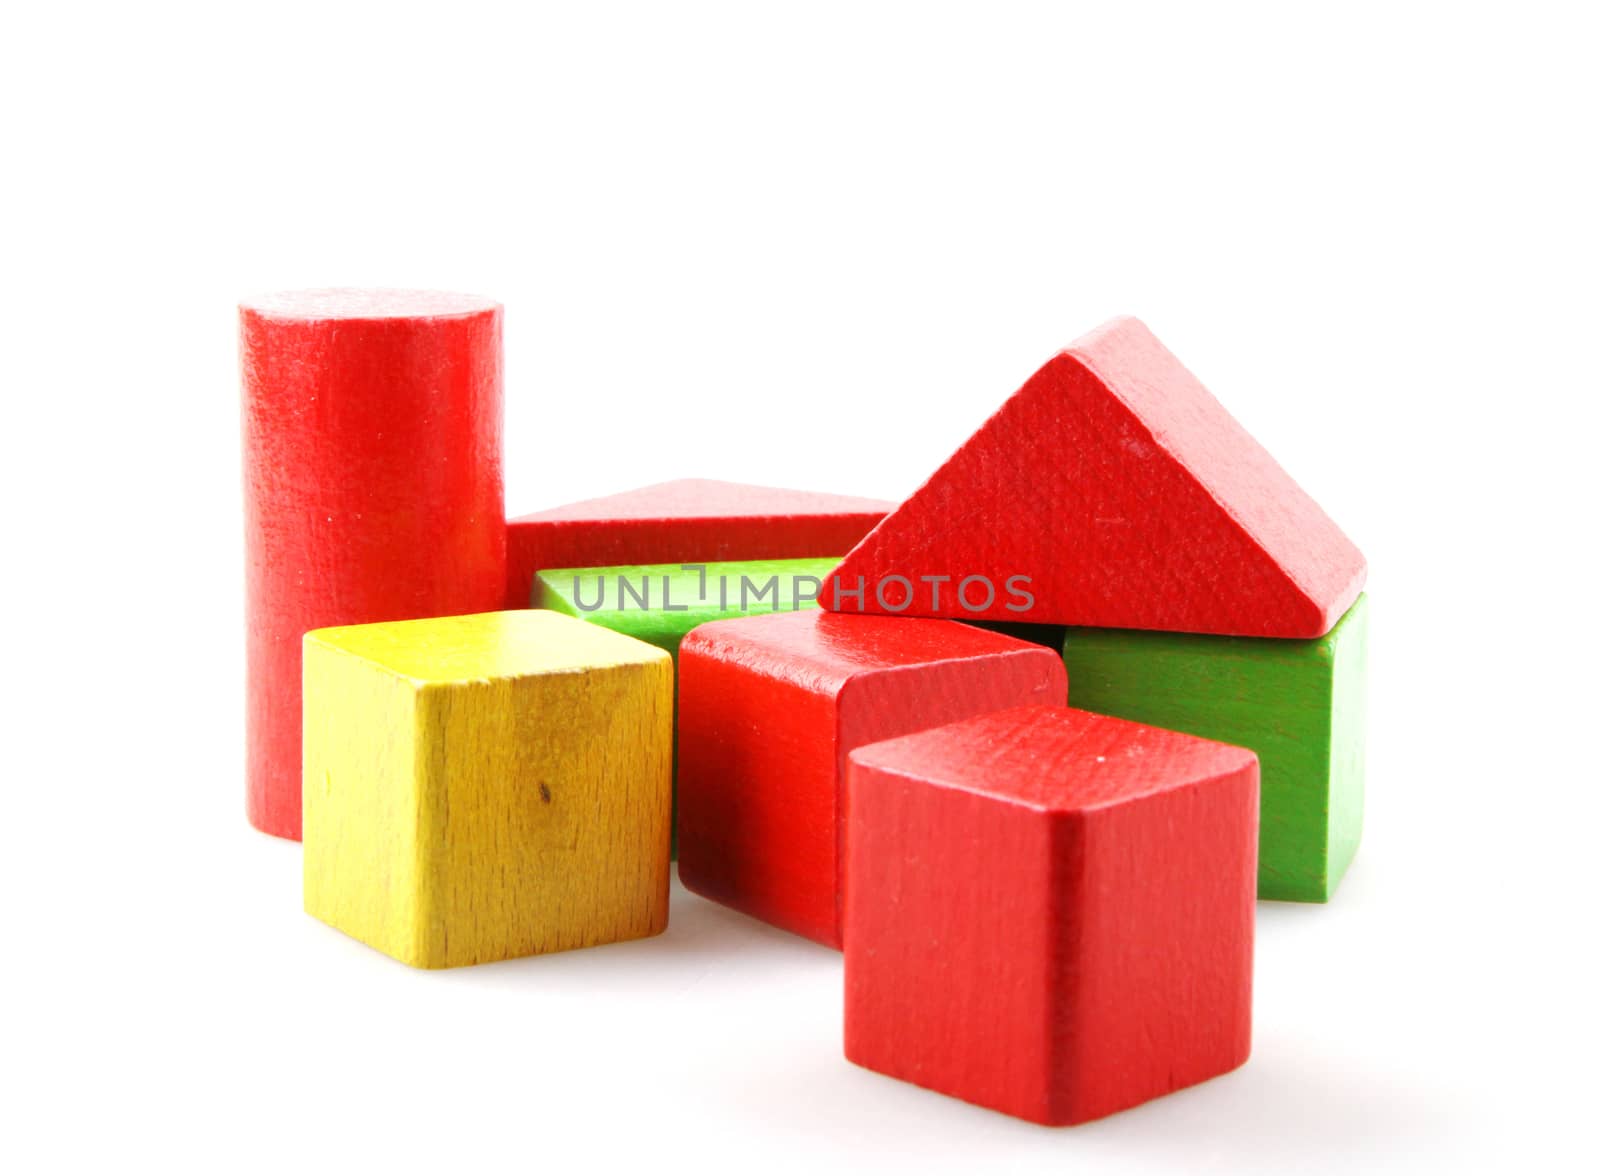 Wooden Building Blocks Isolated On White Background by nenovbrothers